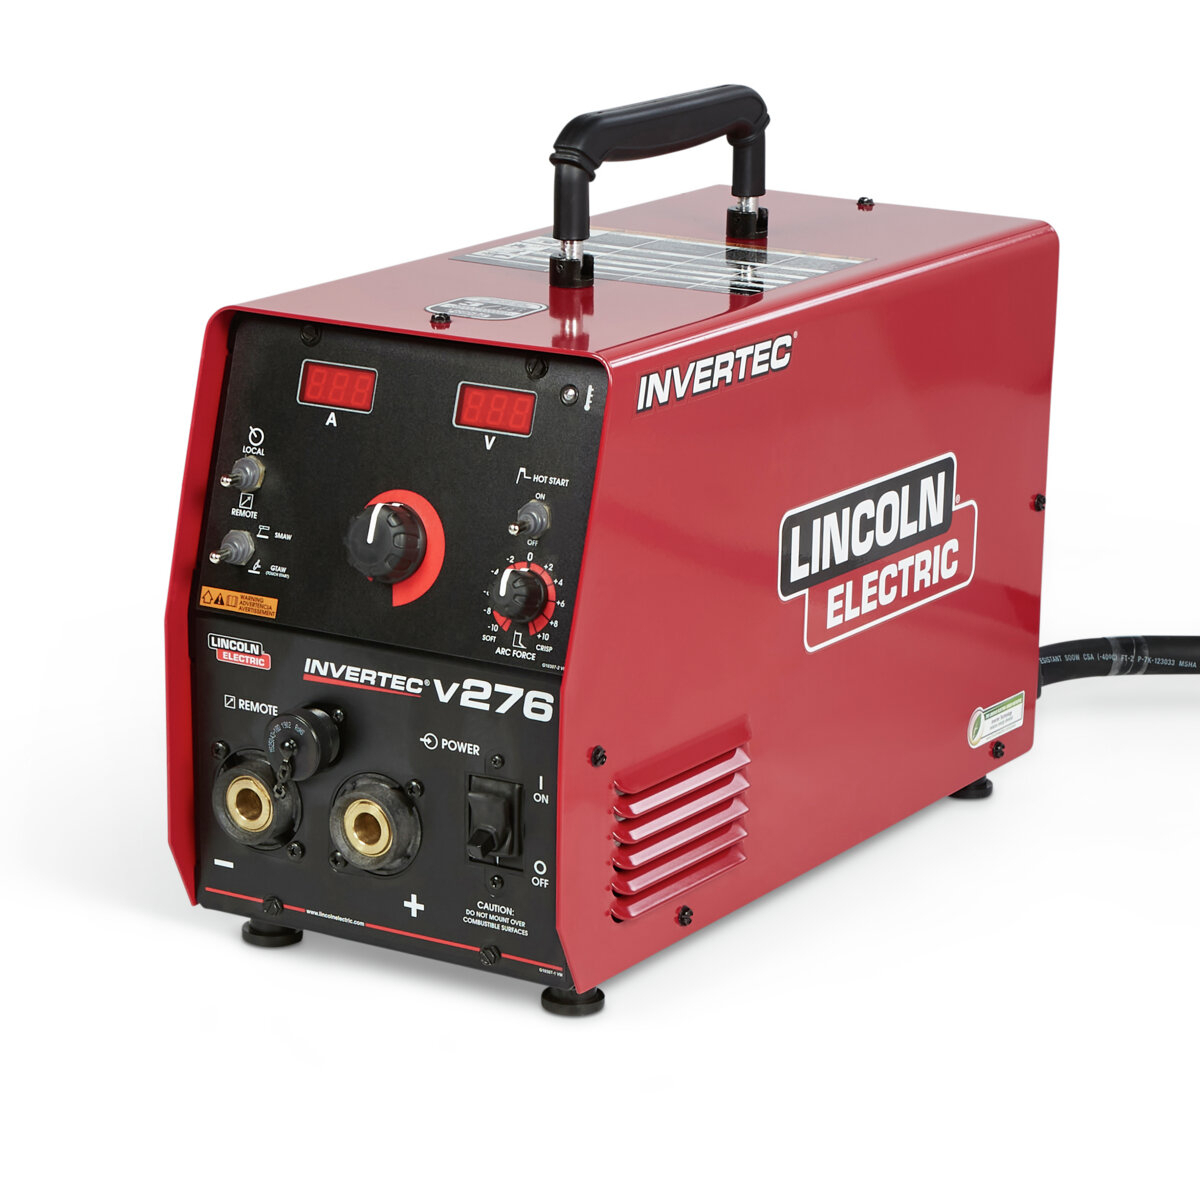 Airgas - LINK4868-1 - Lincoln Electric® Invertec®/Invertec® V276 1 or 3  Phase Multi-Process Welder With 208 - 575 Input Voltage